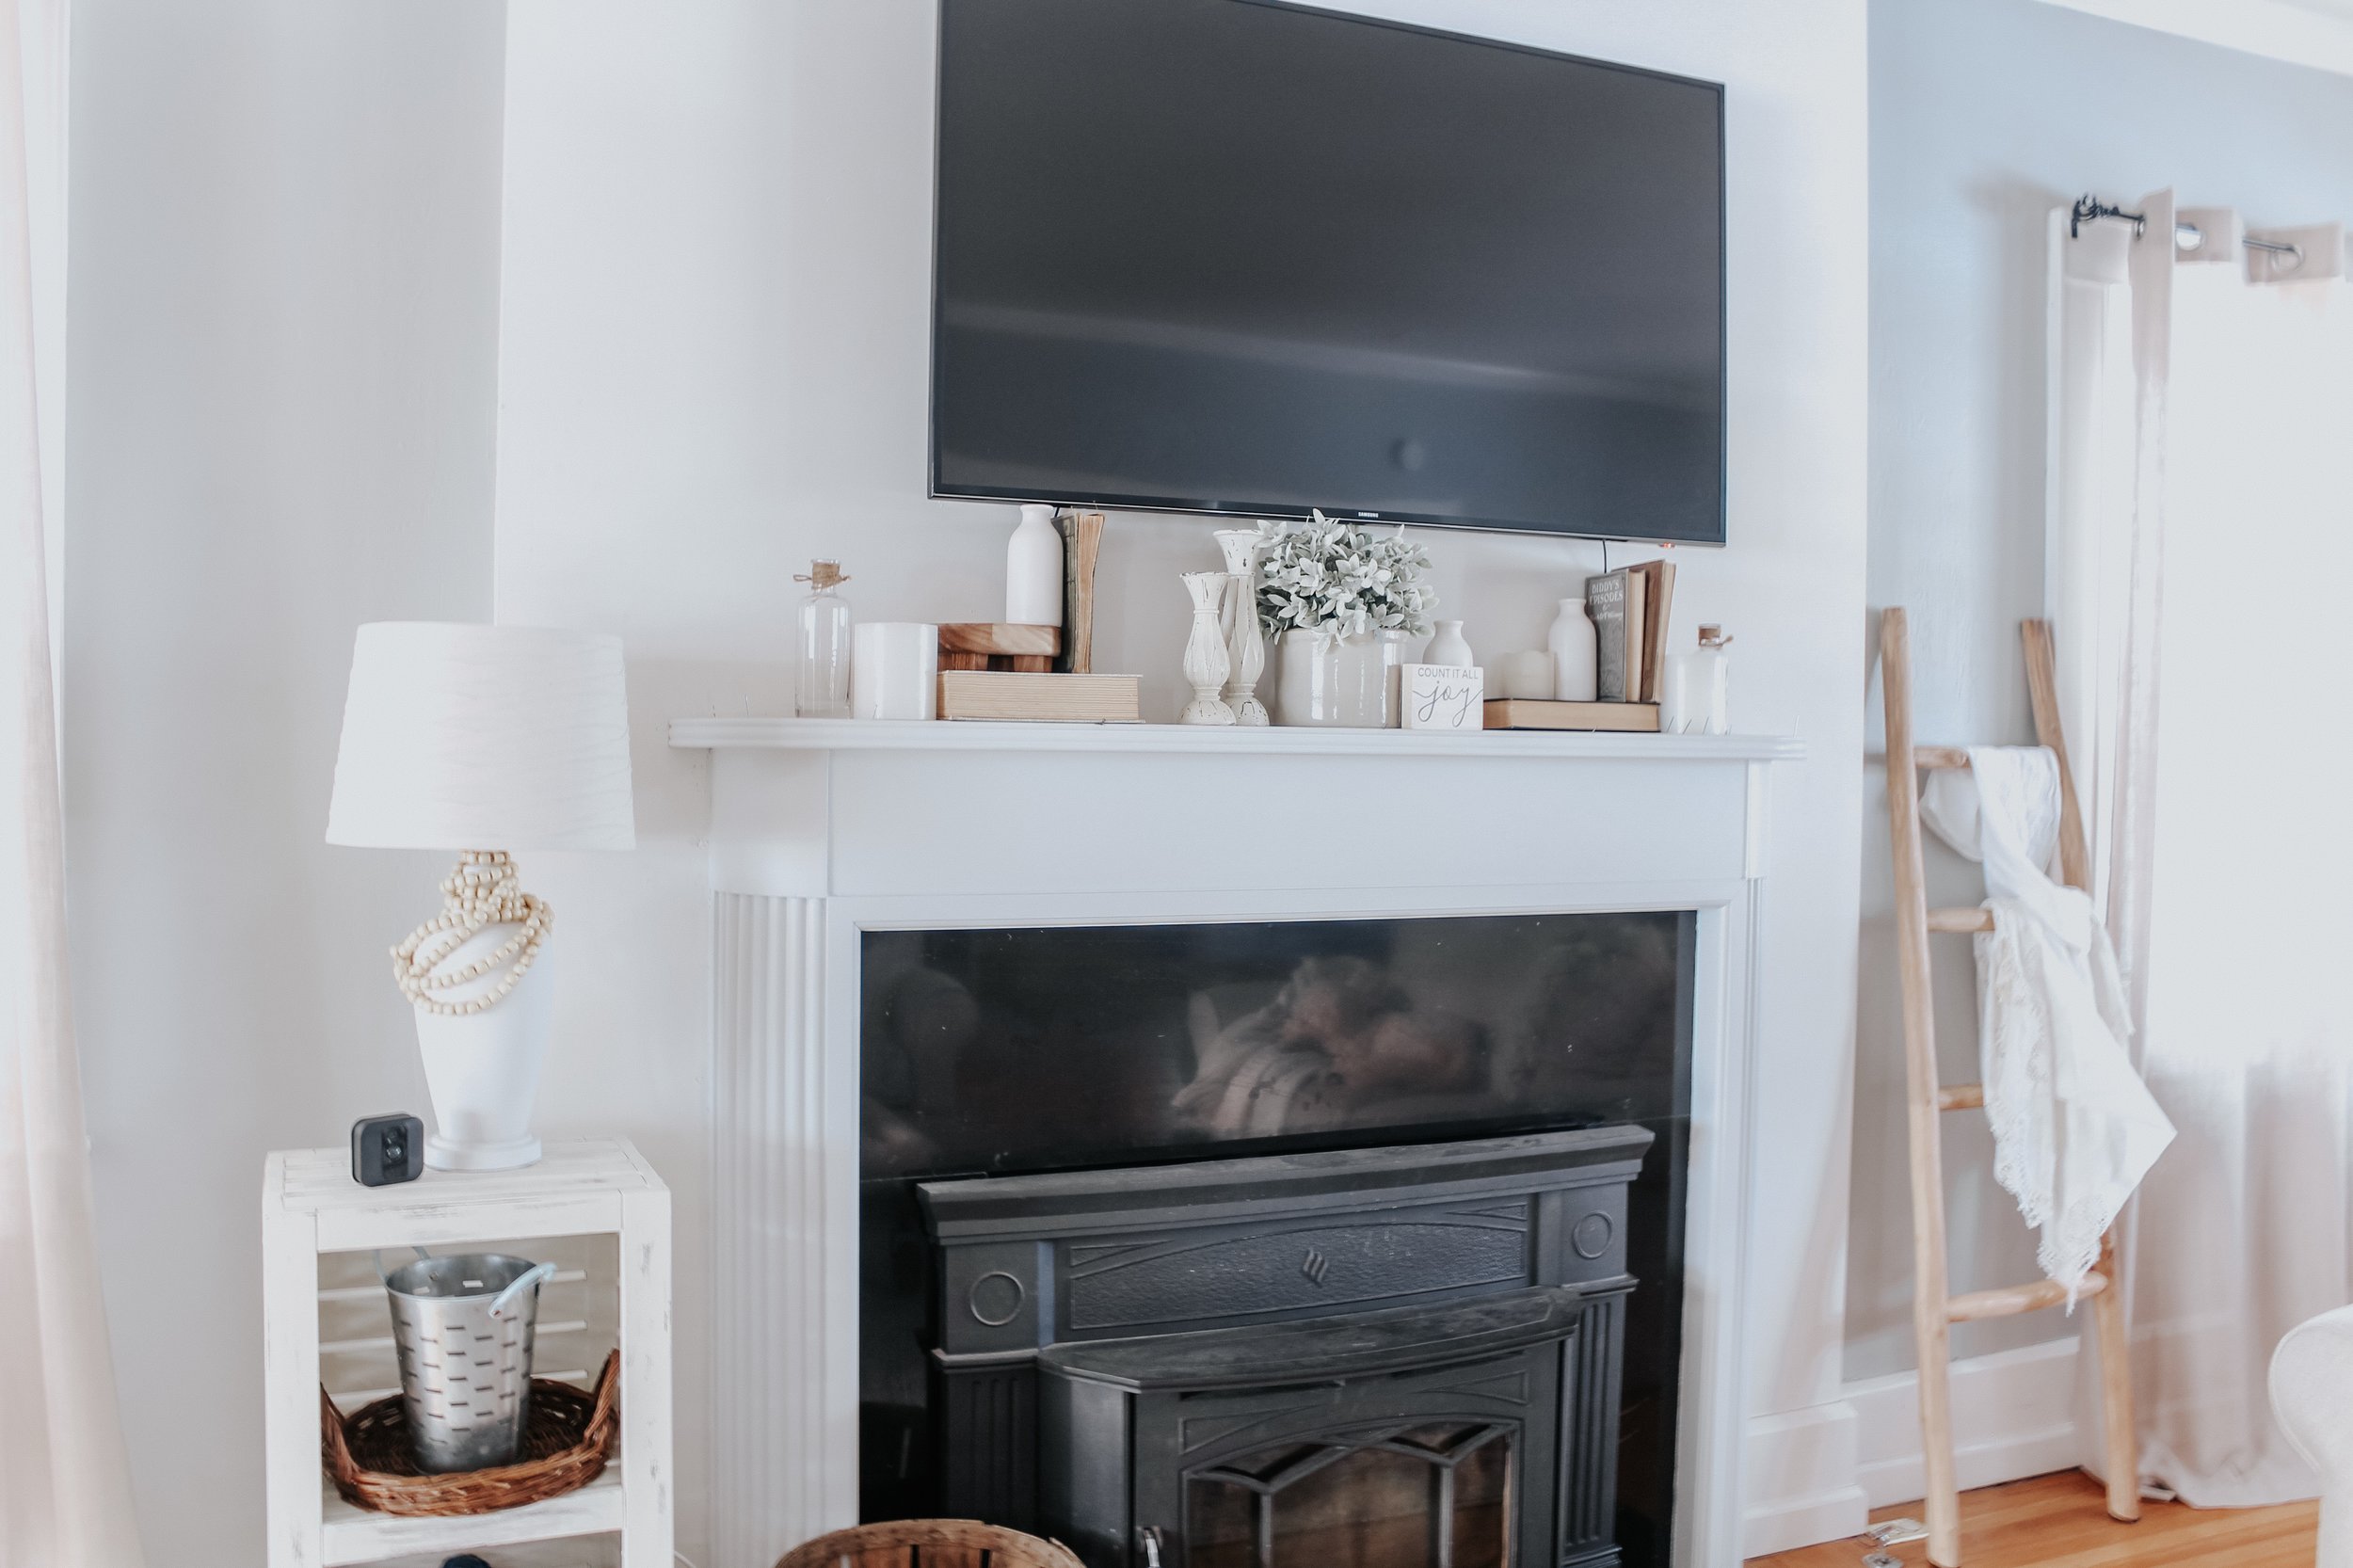 How to hide cables on a fireplace mantel - Cuckoo4Design